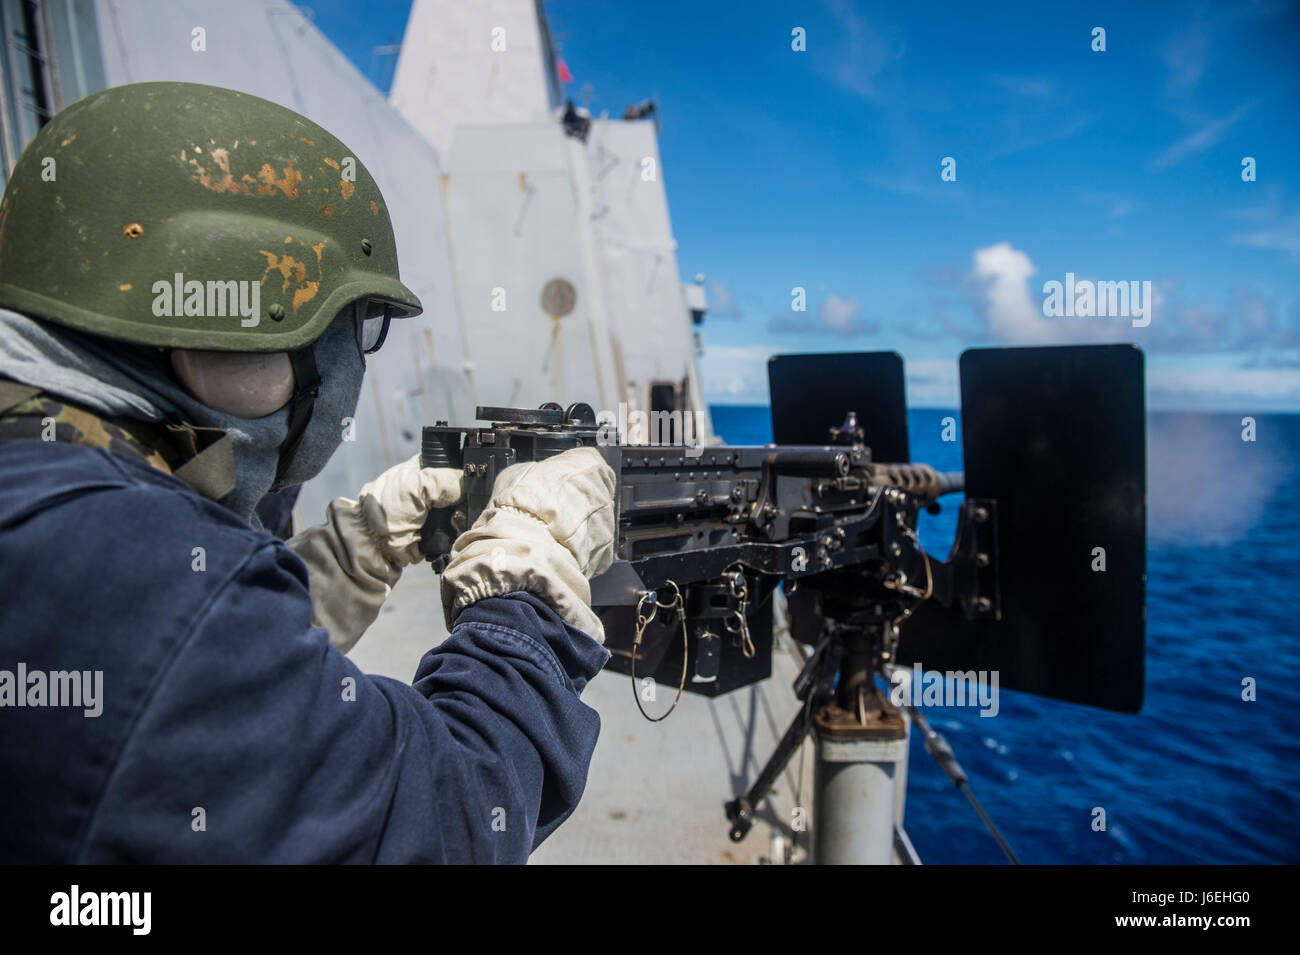 160812-N-XM324-375 WATERS OUTSIDE OF OKINAWA (Aug. 12, 2016) Operations Specialist 2nd Class Jeffrey Joseph, from New Orleans, fires a .50-caliber machine gun from the amphibious transport dock ship USS Green Bay (LPD 20). Green Bay, part of the Bonhomme Richard Expeditionary Strike Group, is operating in the U.S. 7th Fleet area of operations in support of security and stability in the Indo-Asia-Pacific region. (U.S. Navy photo by Mass Communication Specialist 3rd Class Patrick Dionne/Released) Stock Photo